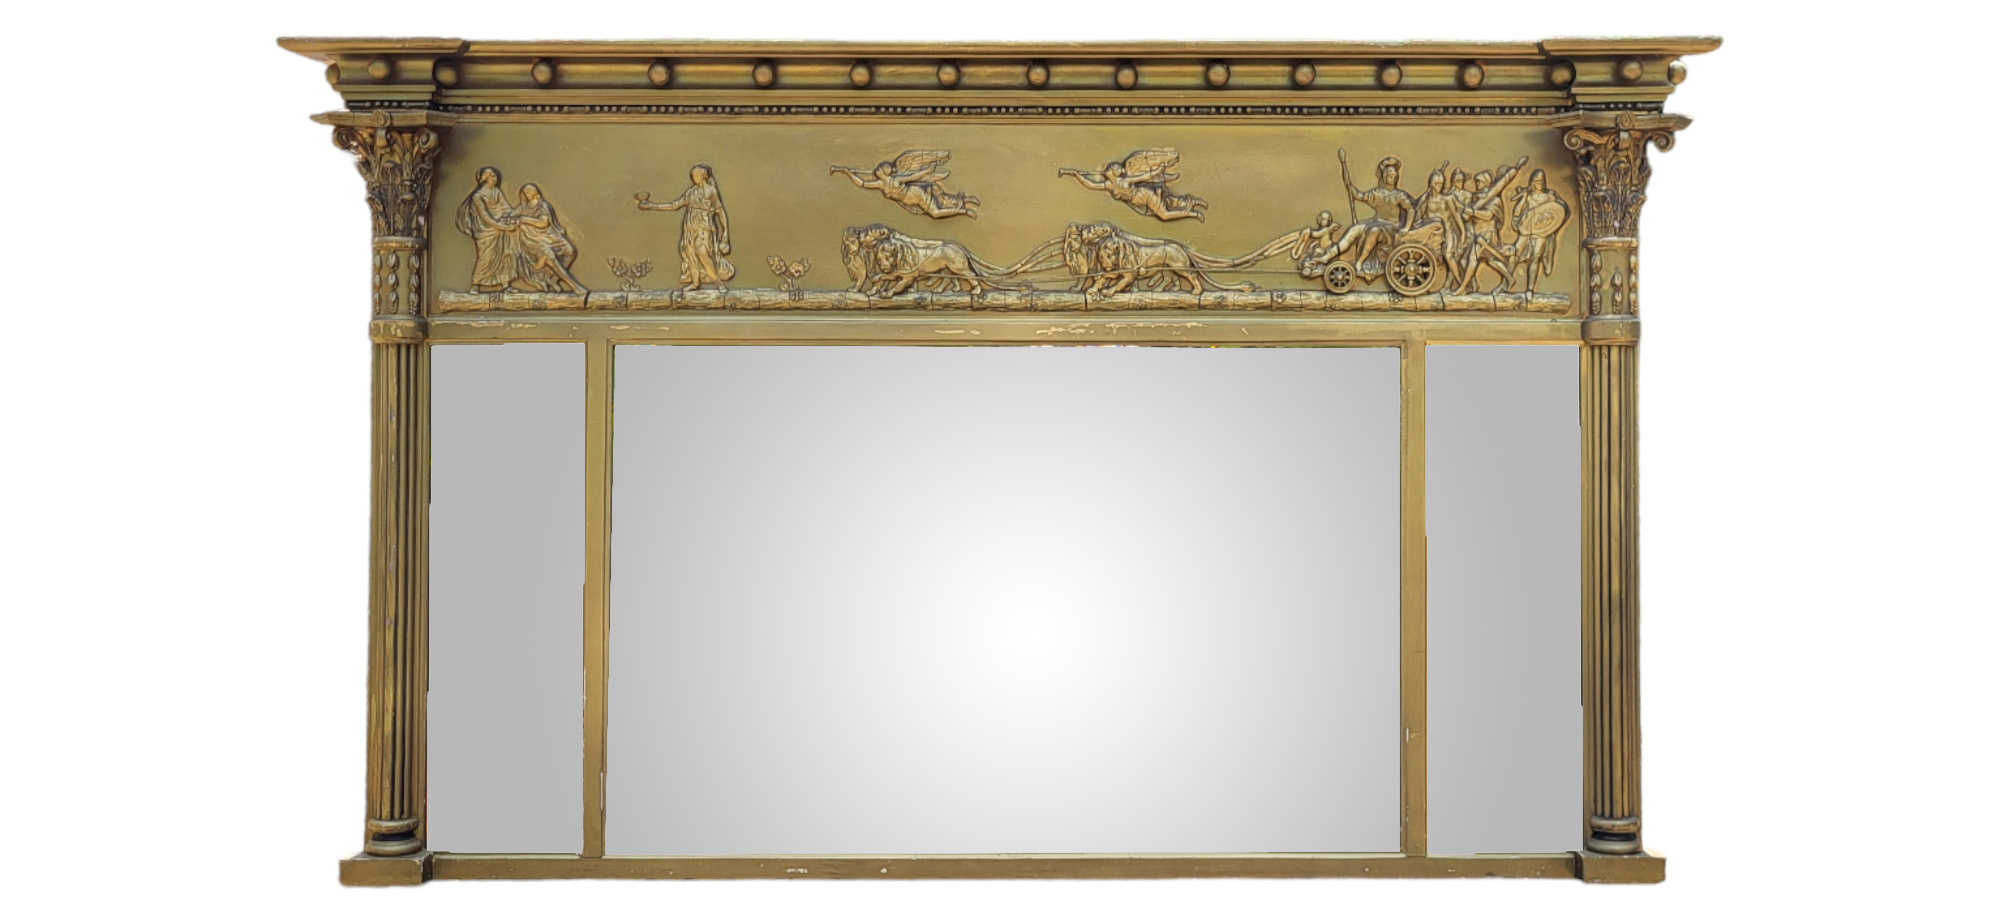 A REGENCY GILT GESSO TRIPTYCH OVERMANTLE MIRROR Rectangular form, with classical column supports,